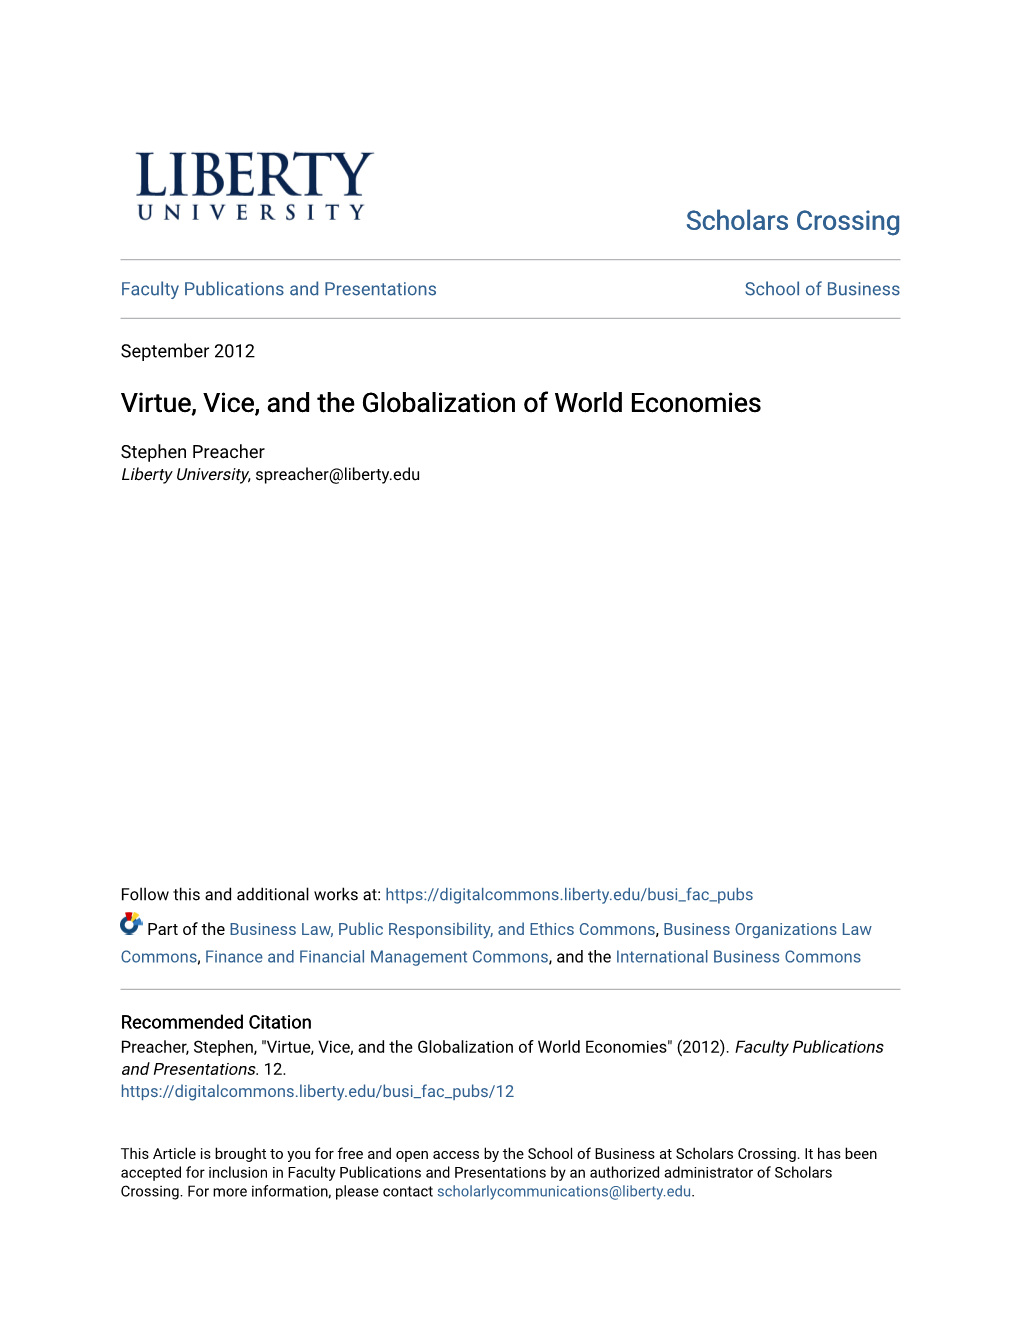 Virtue, Vice, and the Globalization of World Economies